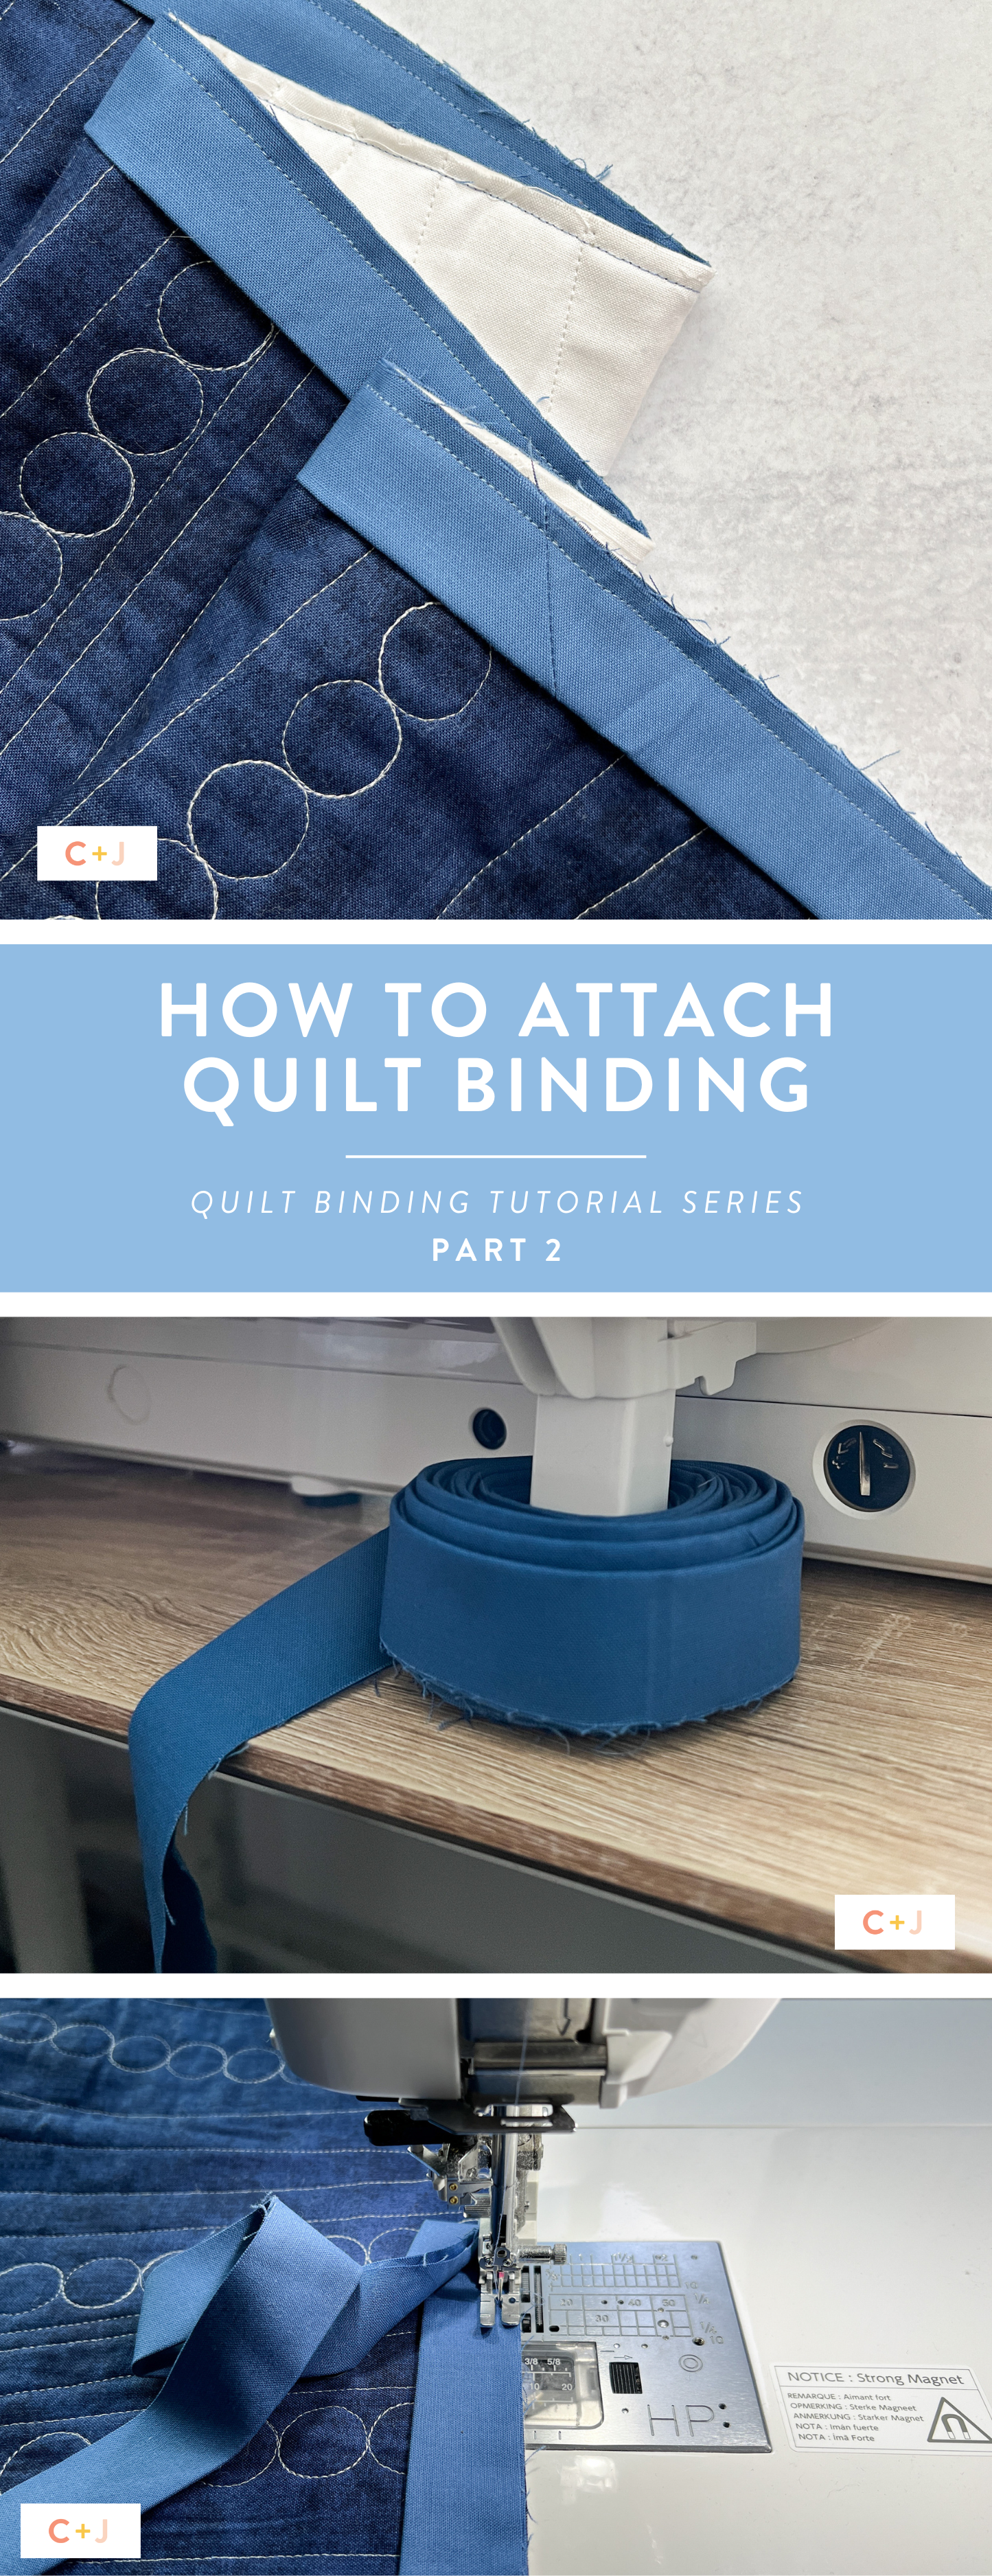 How to Machine Bind a Quilt - Tutorial - Cotton and Joy